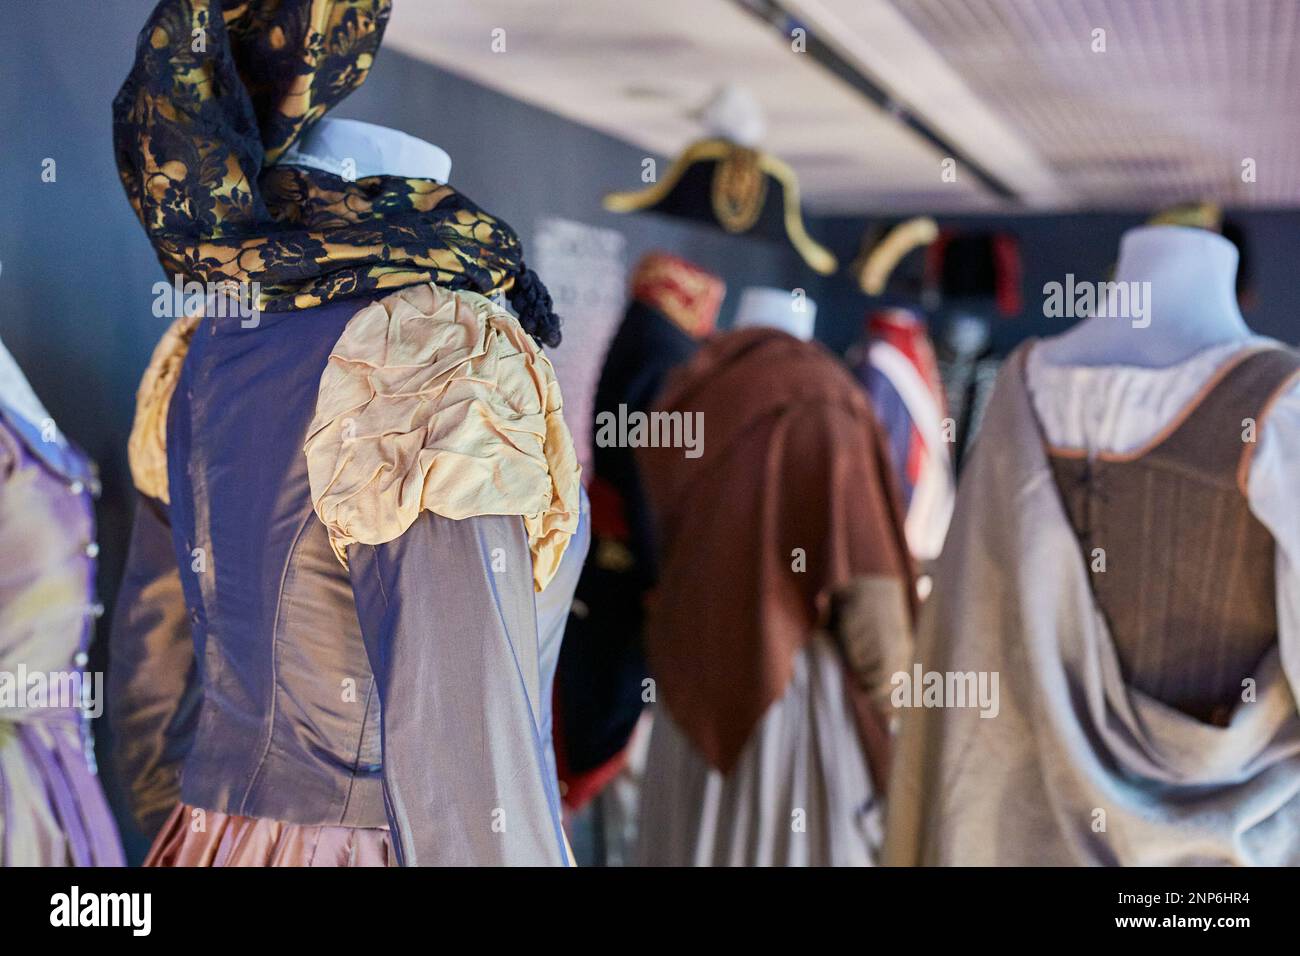 Some of the costumes in the Galdosian costume exhibition 'Cornejo, el  sastre de Galdós', inaugurated today in the Teatros del Canal, in Madrid  (Spain), on 11th December 2020. The exhibition is a